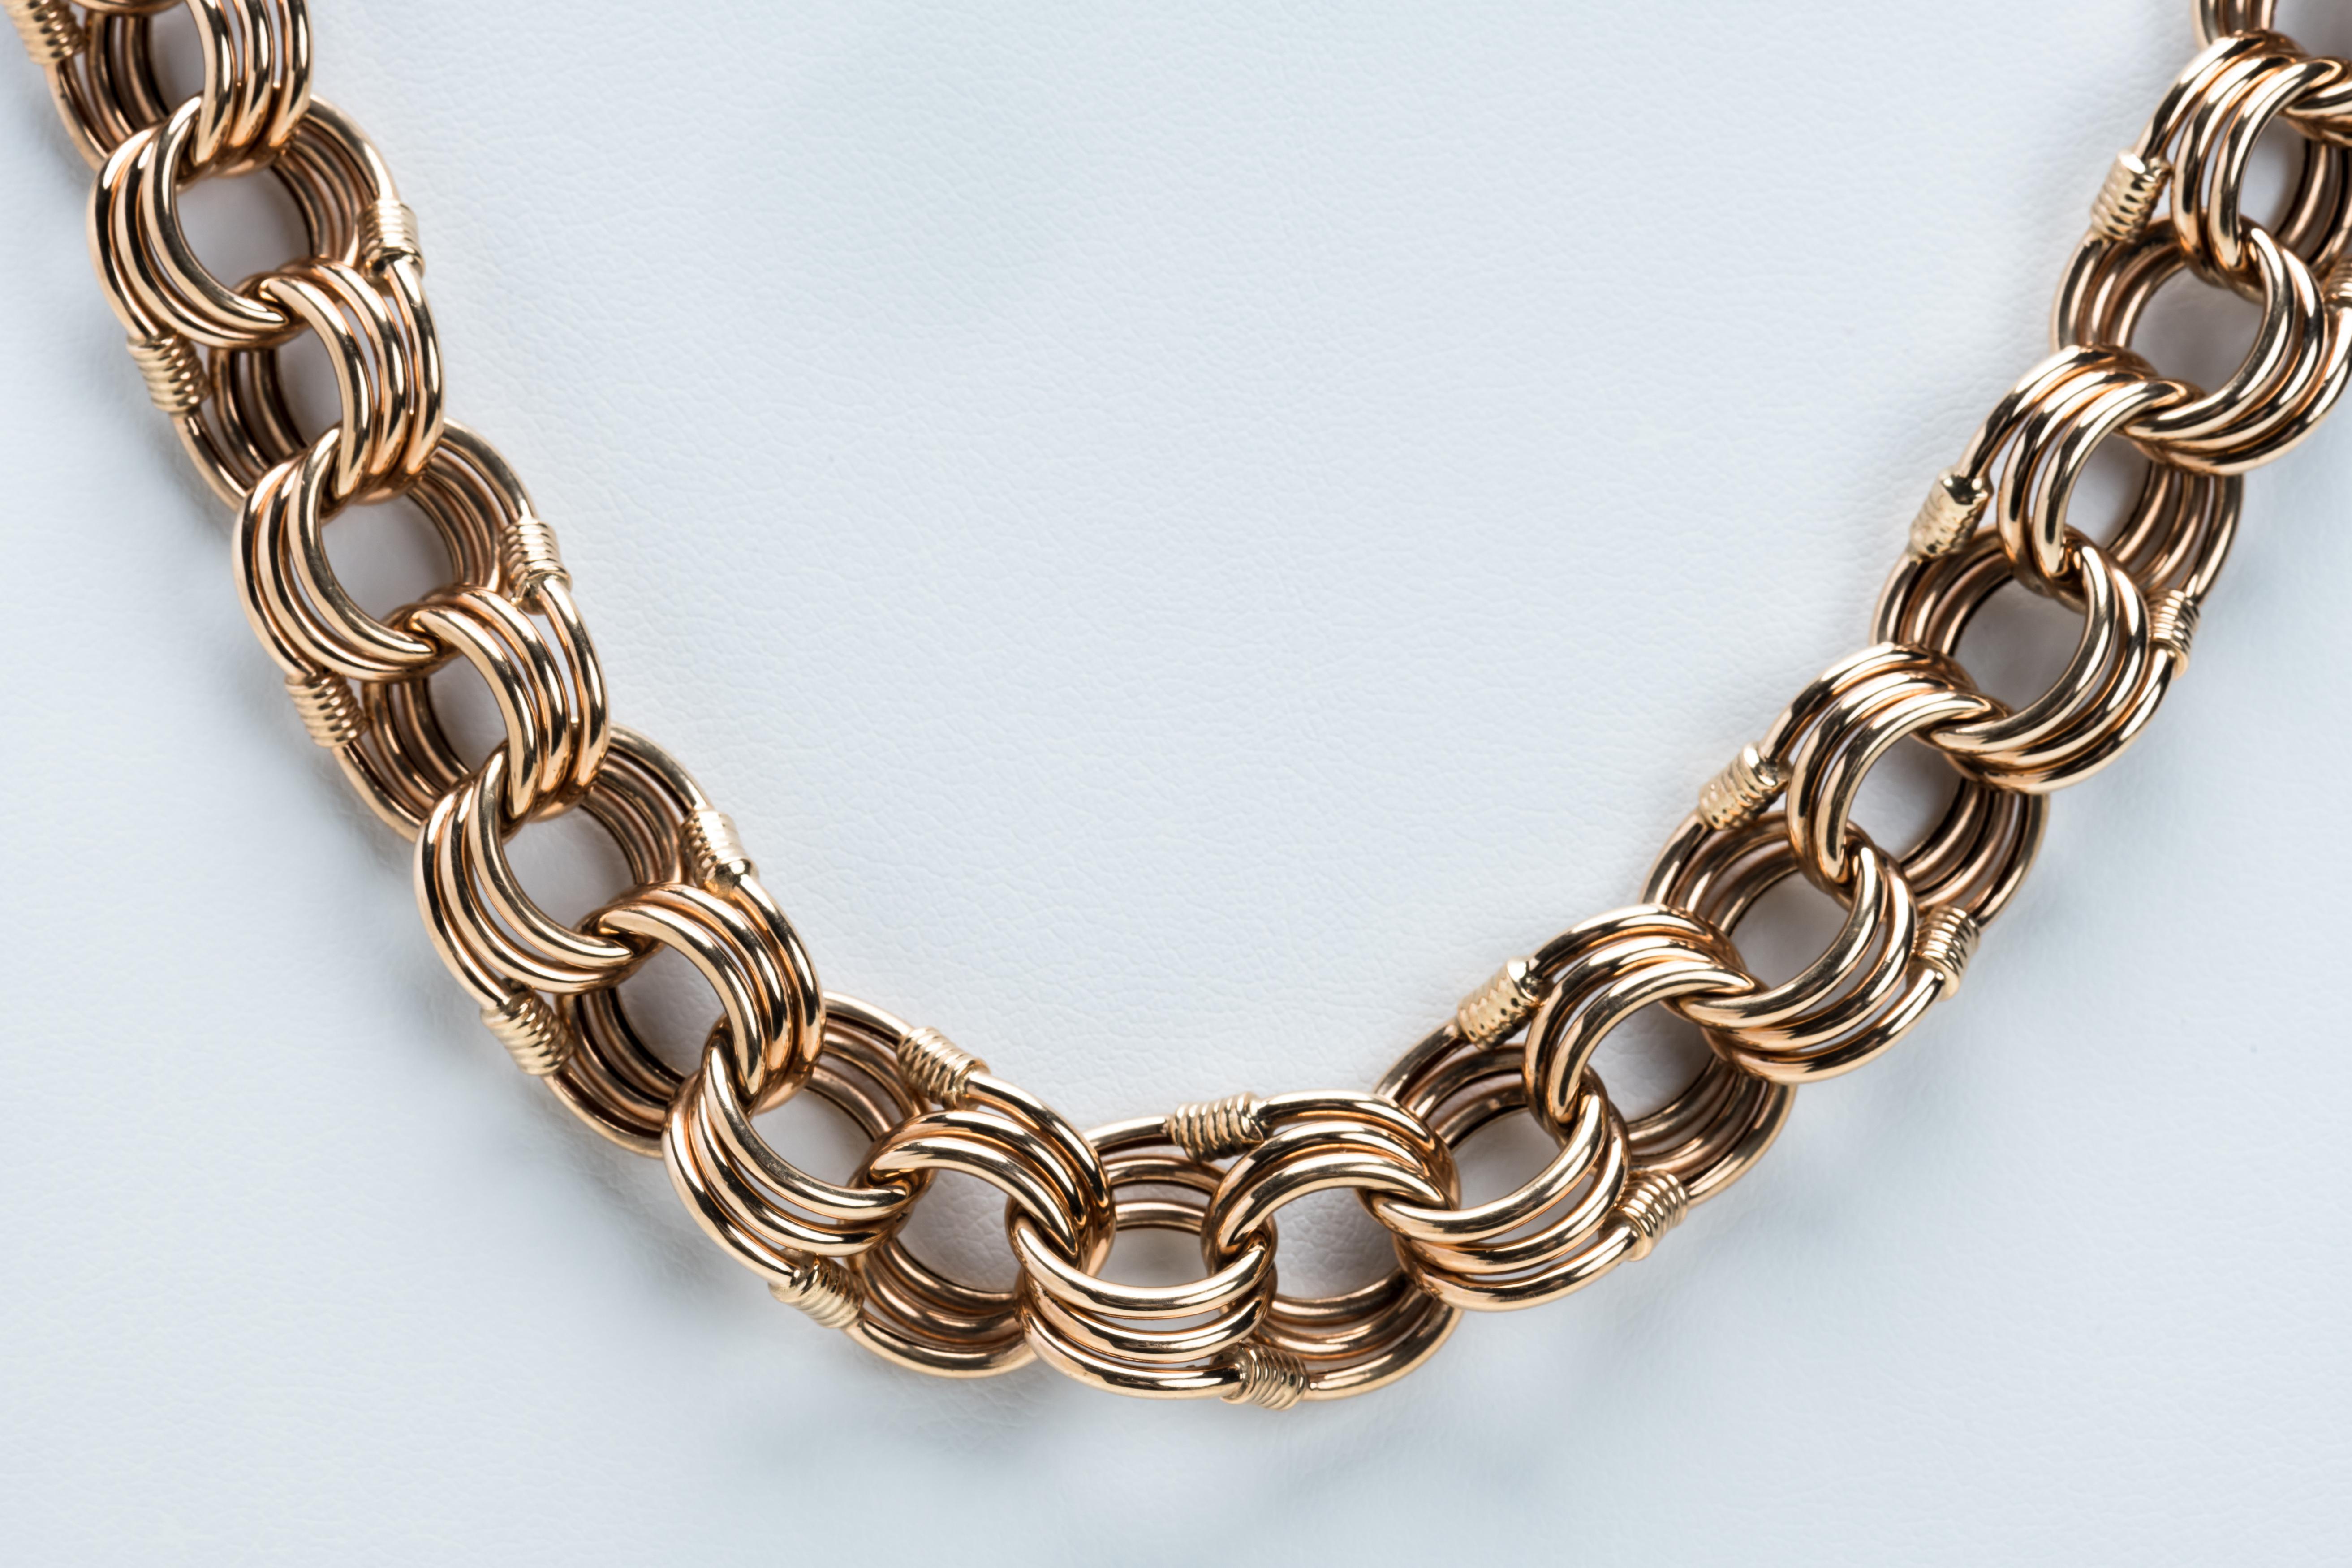 This beautifully designed 18 karat rose gold necklace has triple looped intertwined circular links with a double safety clasp. stamped Industria Argentina 750.

Size: L: 20